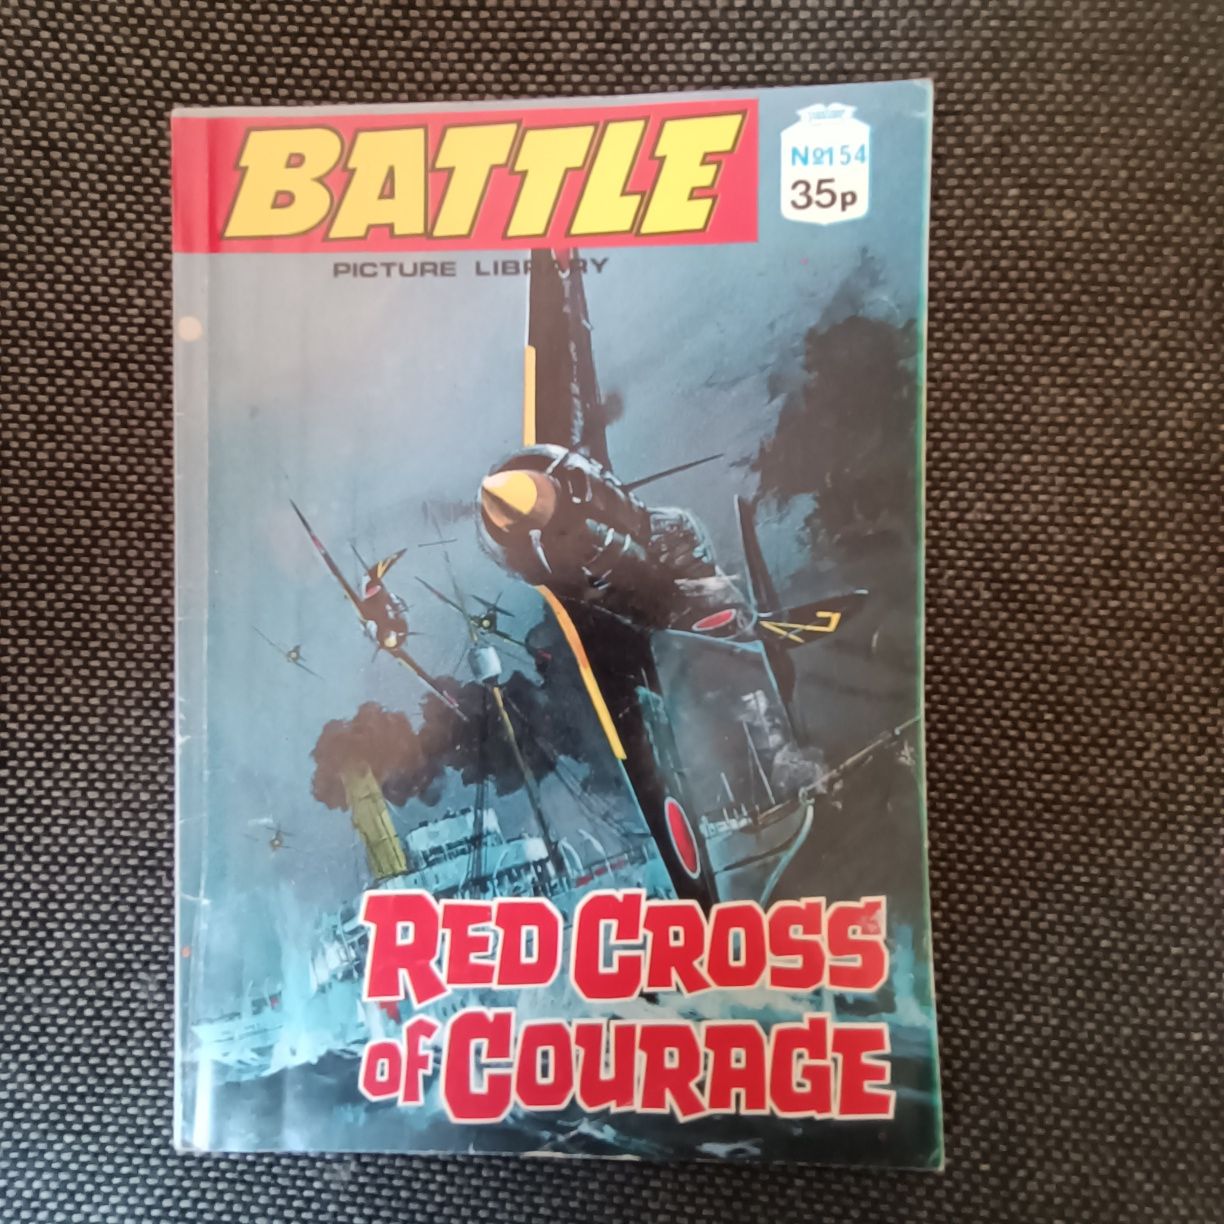 Battle Picture Library komiks
Red Cross of Courage